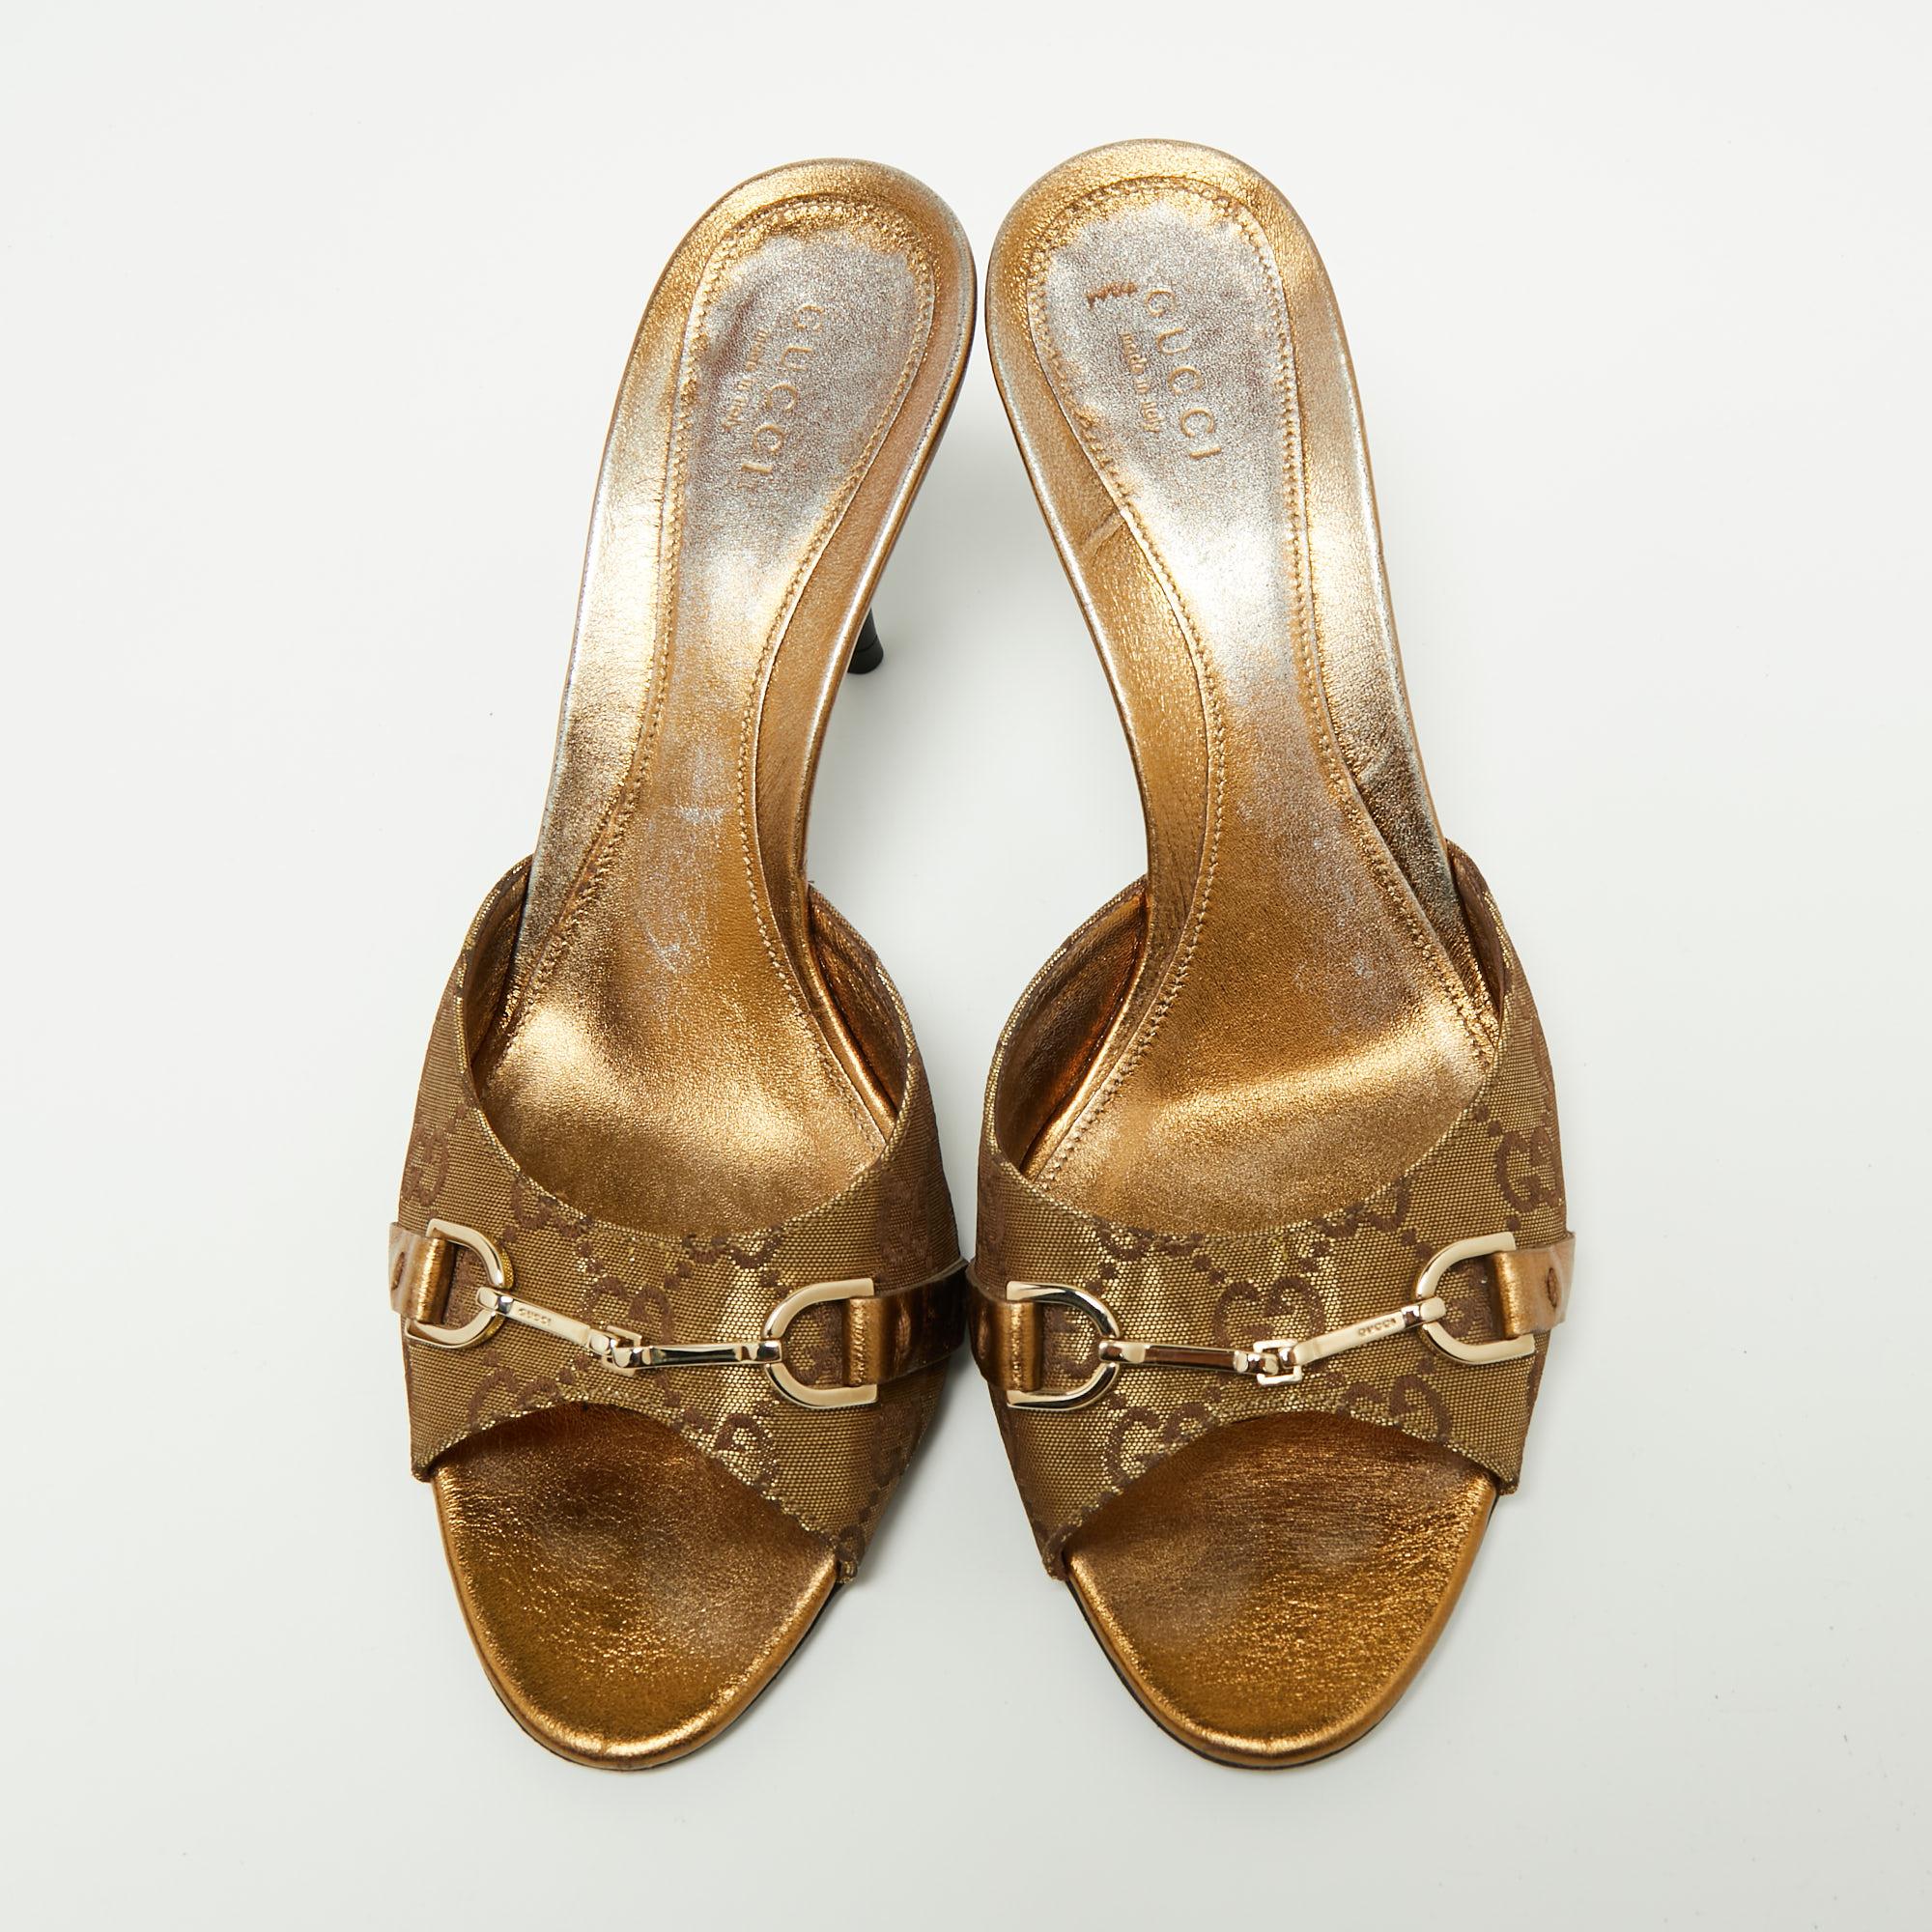 Covered with House motifs and precisely crafted, these slide sandals from Gucci will help you impart a sophisticated touch. They are made using gold Guccissima canvas on the exterior and show a gold-toned Horsebit accent on the front attached to